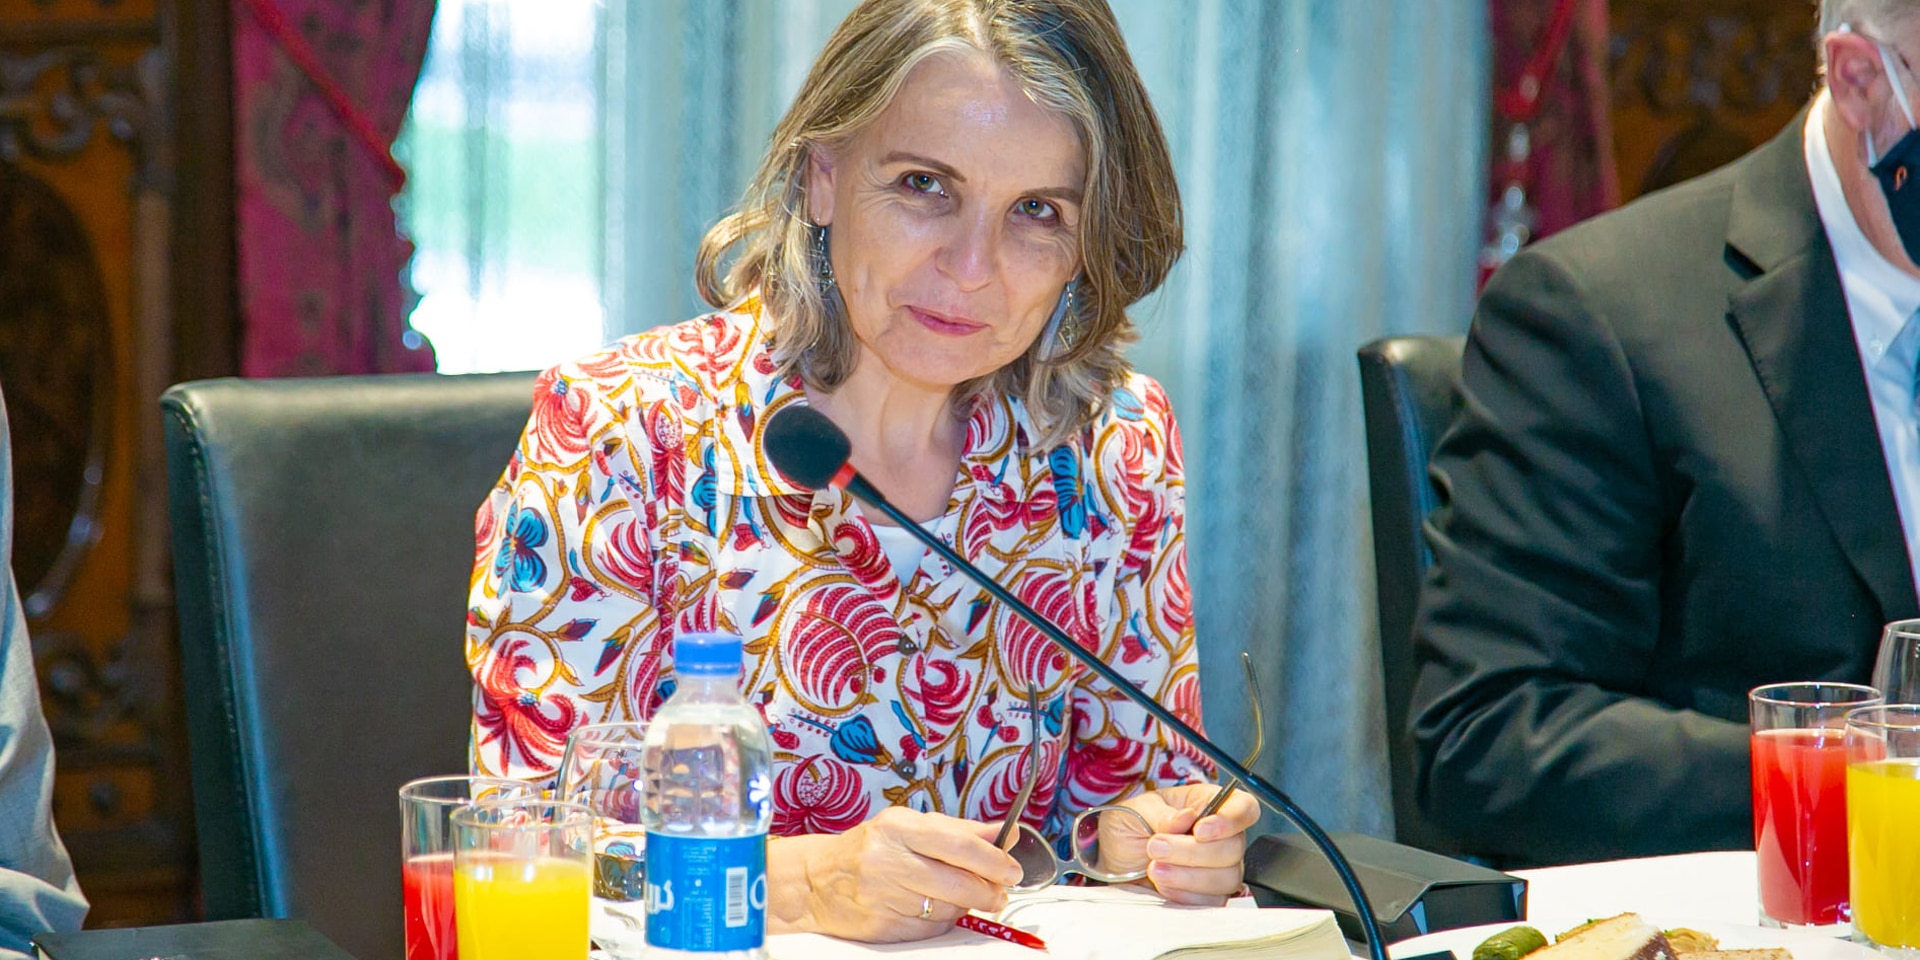 Walburga Roos, the head of the Swiss representation in Kabul, at a conference.